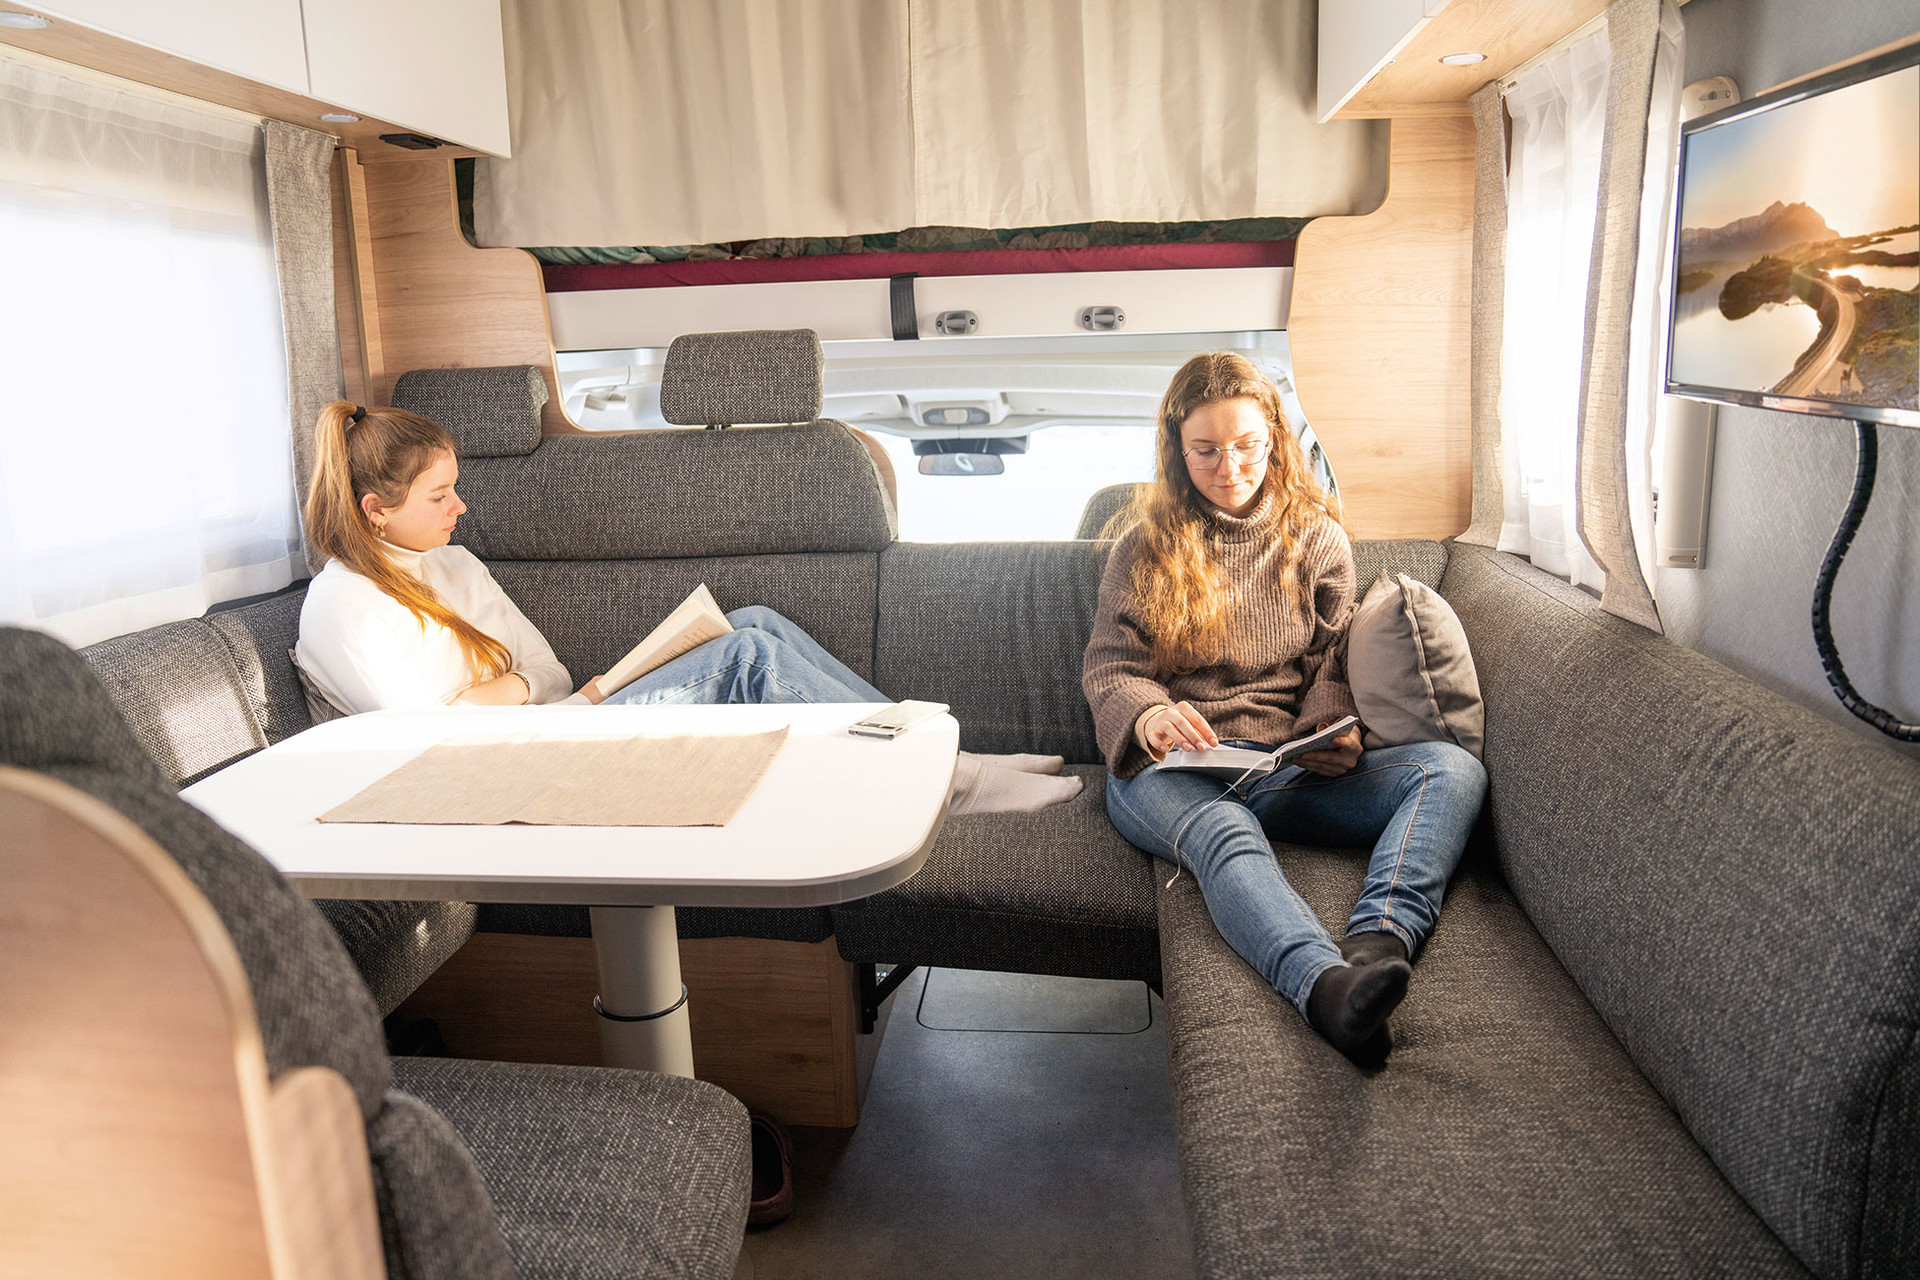 For extra comfort, the passage to the cab can be closed off with matching upholstered elements. This creates a spacious U-shaped seating lounge and turns the motorhome into a cosy living room – ideal for large family gatherings.